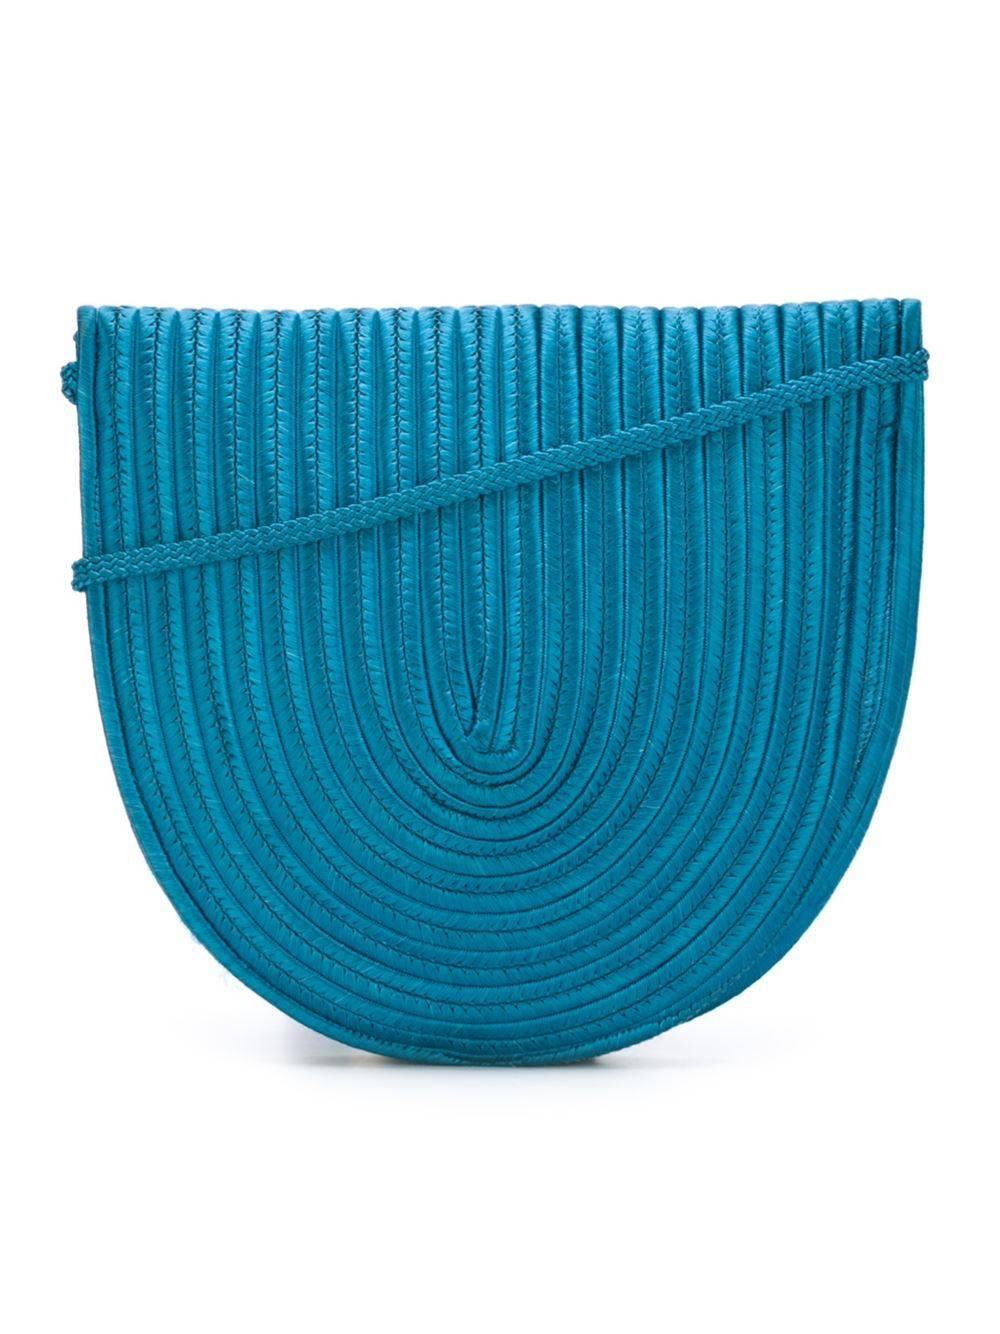 Nina Ricci vintage little turquoise bag of the 80s. Made in turquoise passementerie. Marked : Nina Ricci Paris.

Excellent vintage condition. Size : 20 x 18 cm - 7.9 x 7 in.